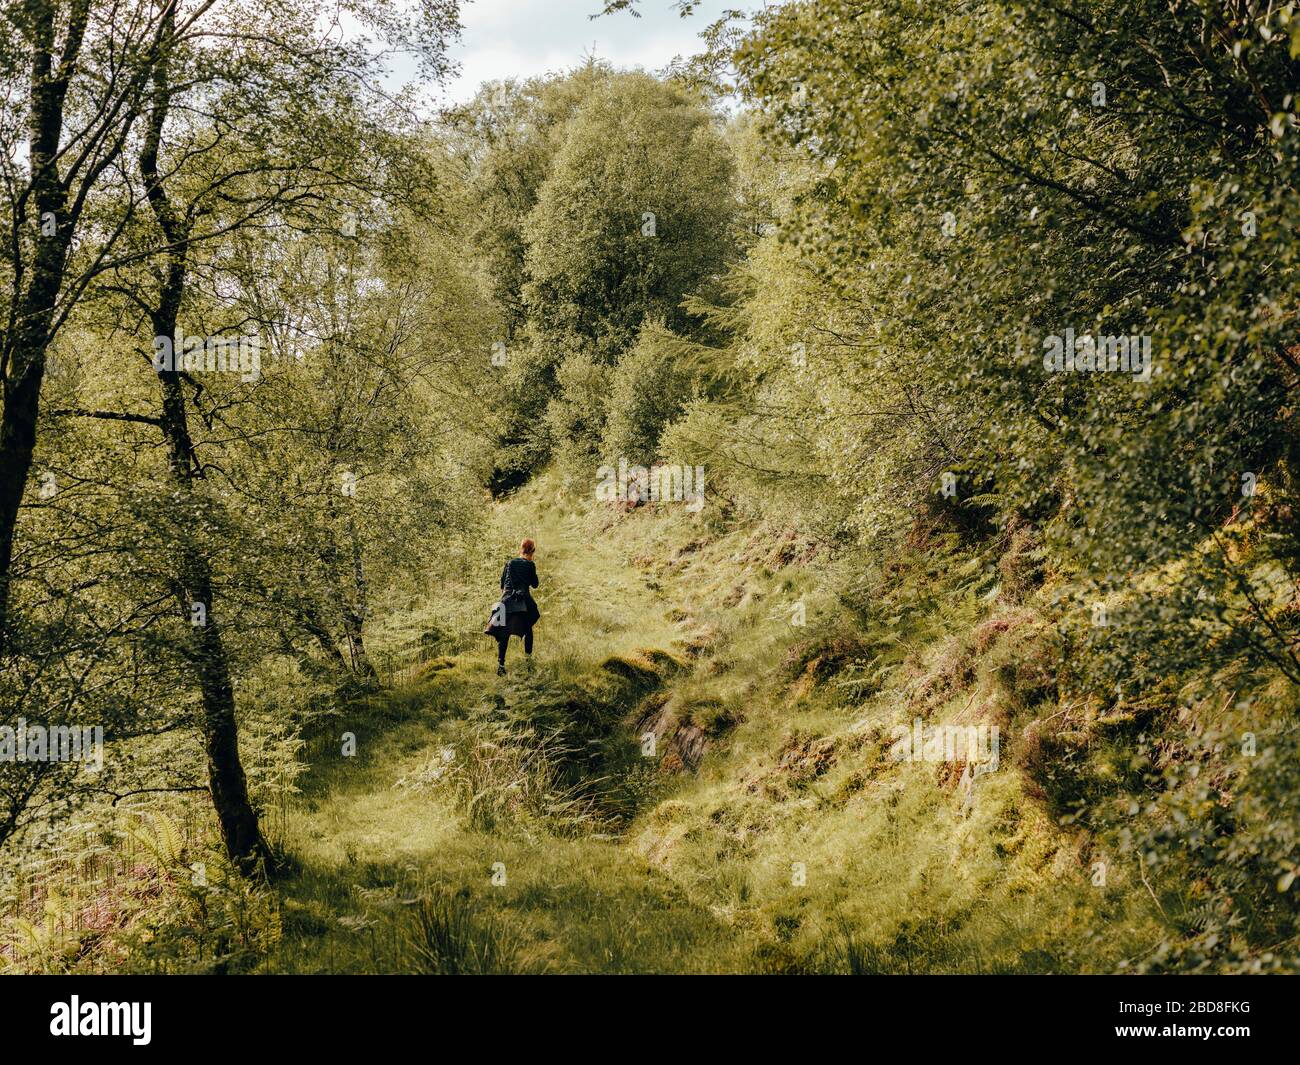 Woman hiking up grassy trail in Scotland forest Stock Photo